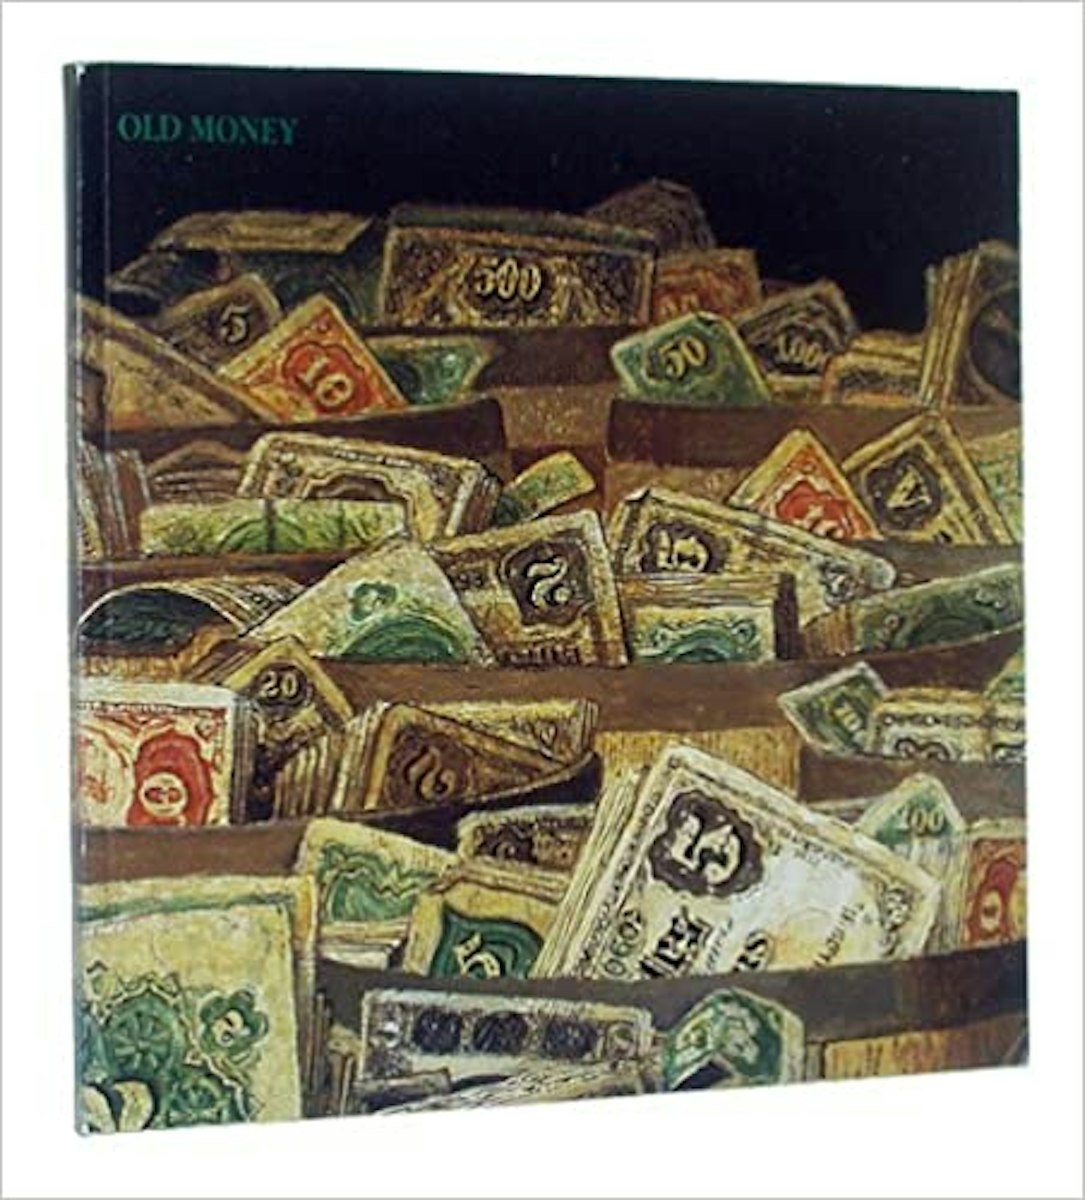 Old Money: American Trompe L’Oeil Images of Currency cover